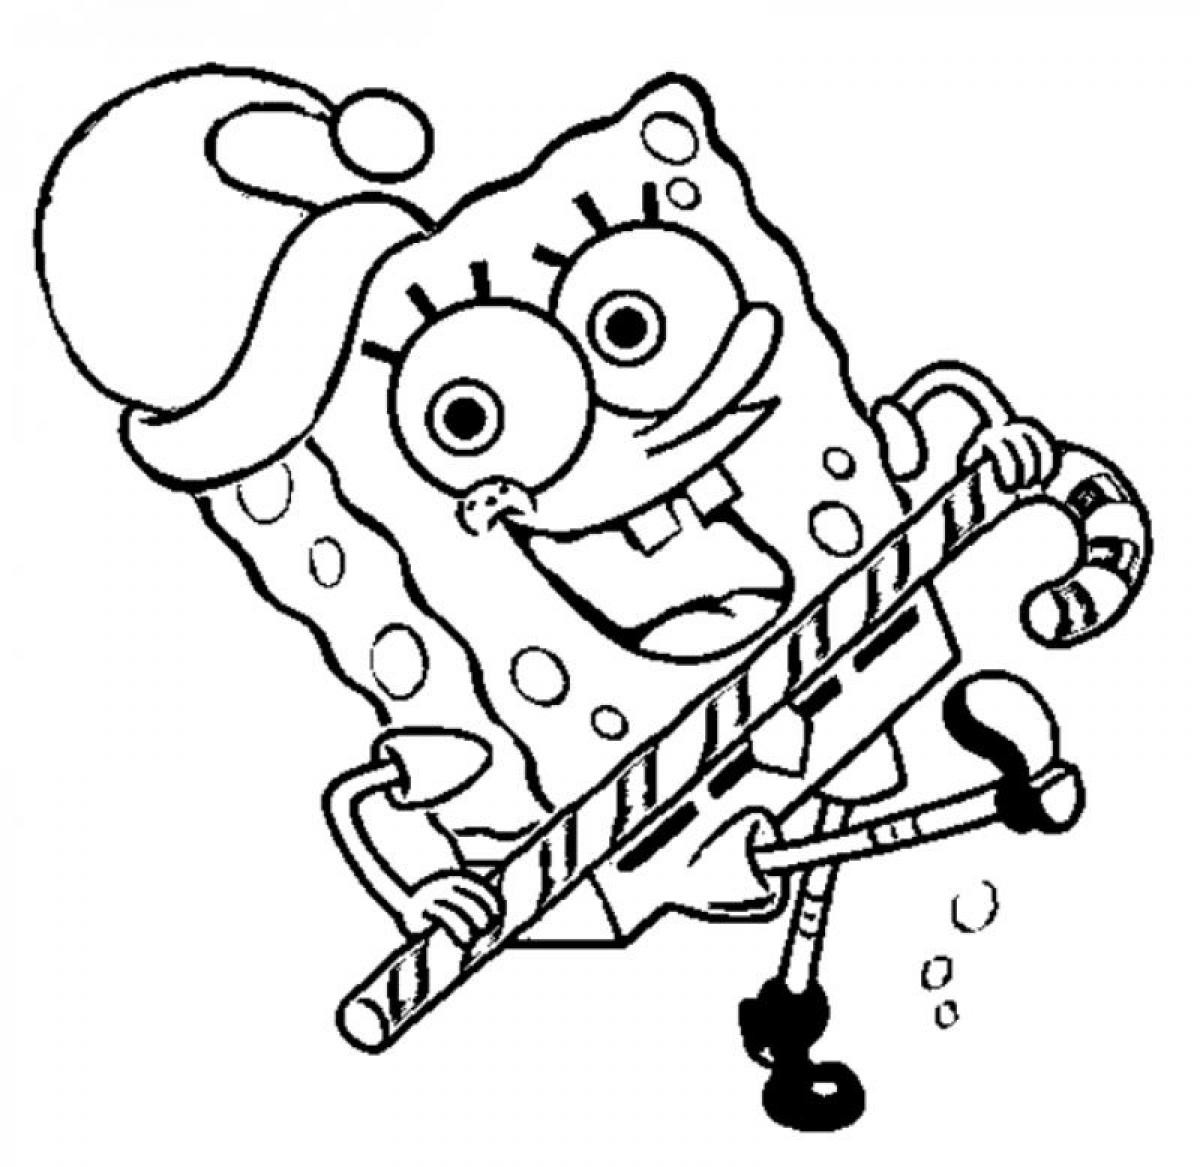 Spongebob and Patrick Christmas Coloring Pages Wallpaper